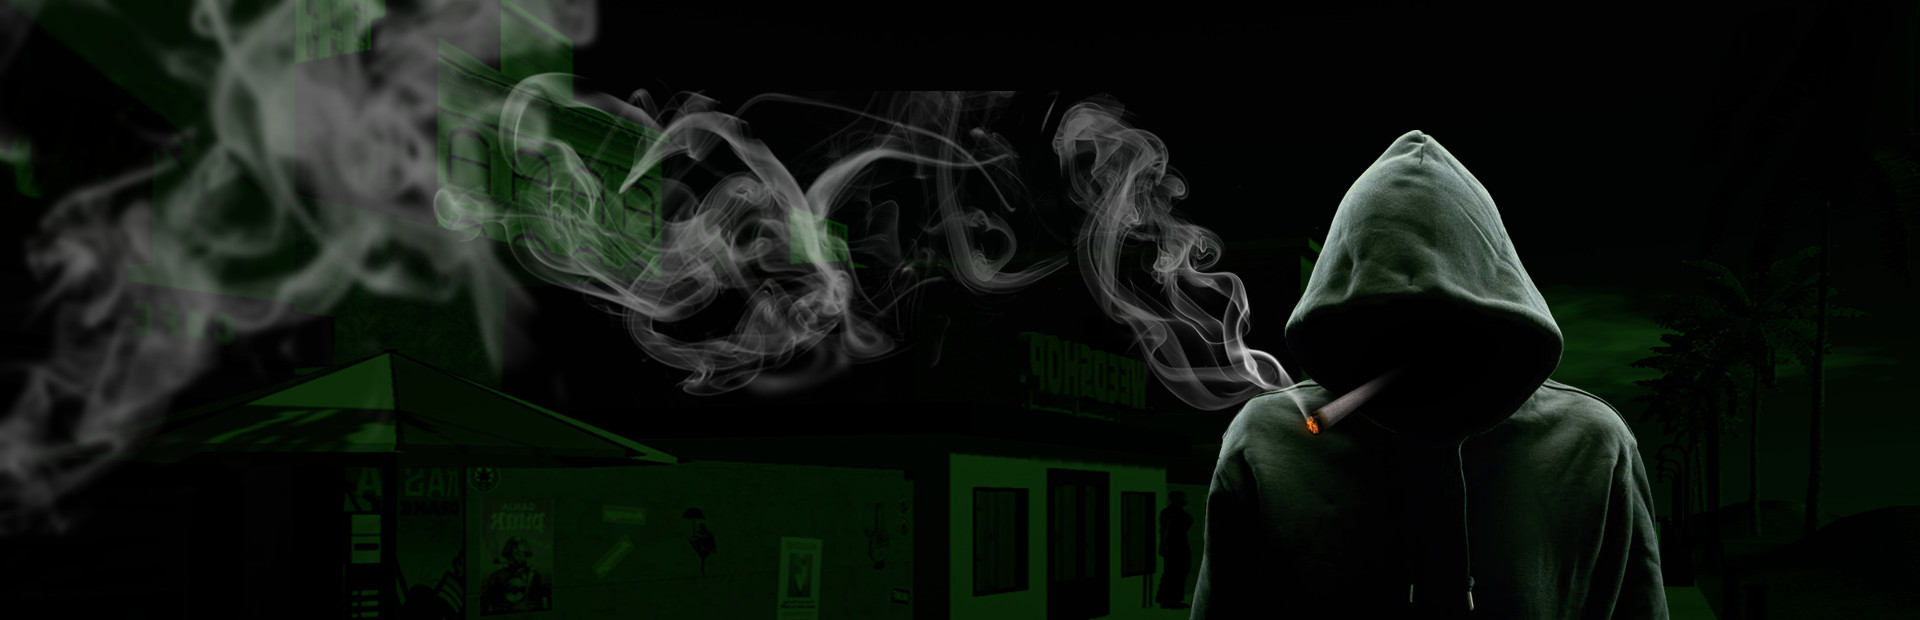 Weed Shop 2 cover image